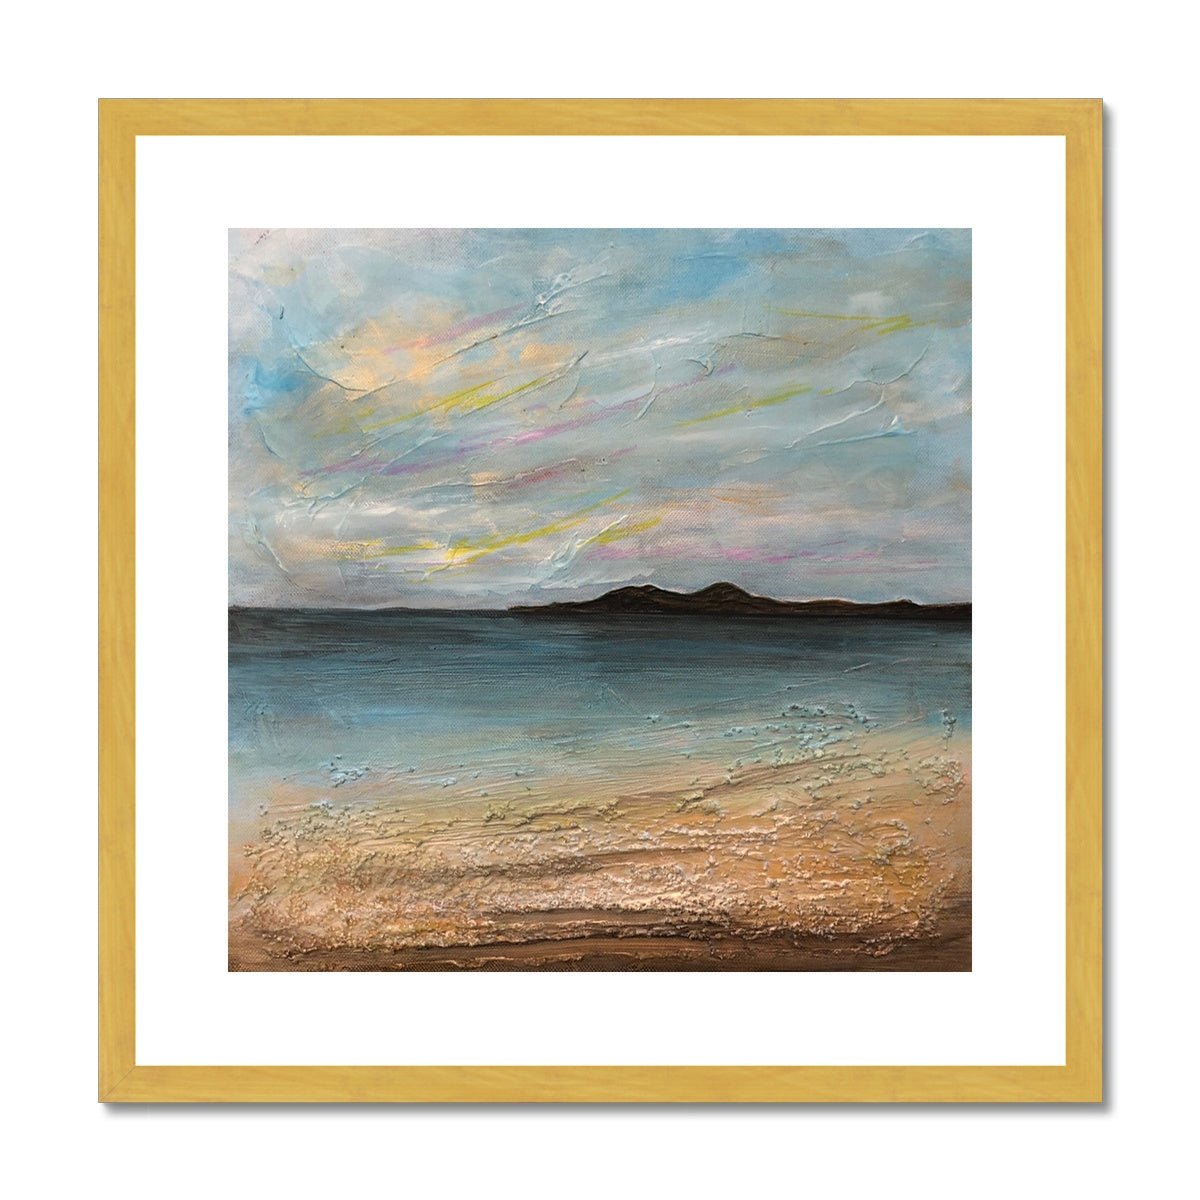 Garrynamonie Beach South Uist Painting | Antique Framed & Mounted Prints From Scotland-Antique Framed & Mounted Prints-Hebridean Islands Art Gallery-20"x20"-Gold Frame-Paintings, Prints, Homeware, Art Gifts From Scotland By Scottish Artist Kevin Hunter